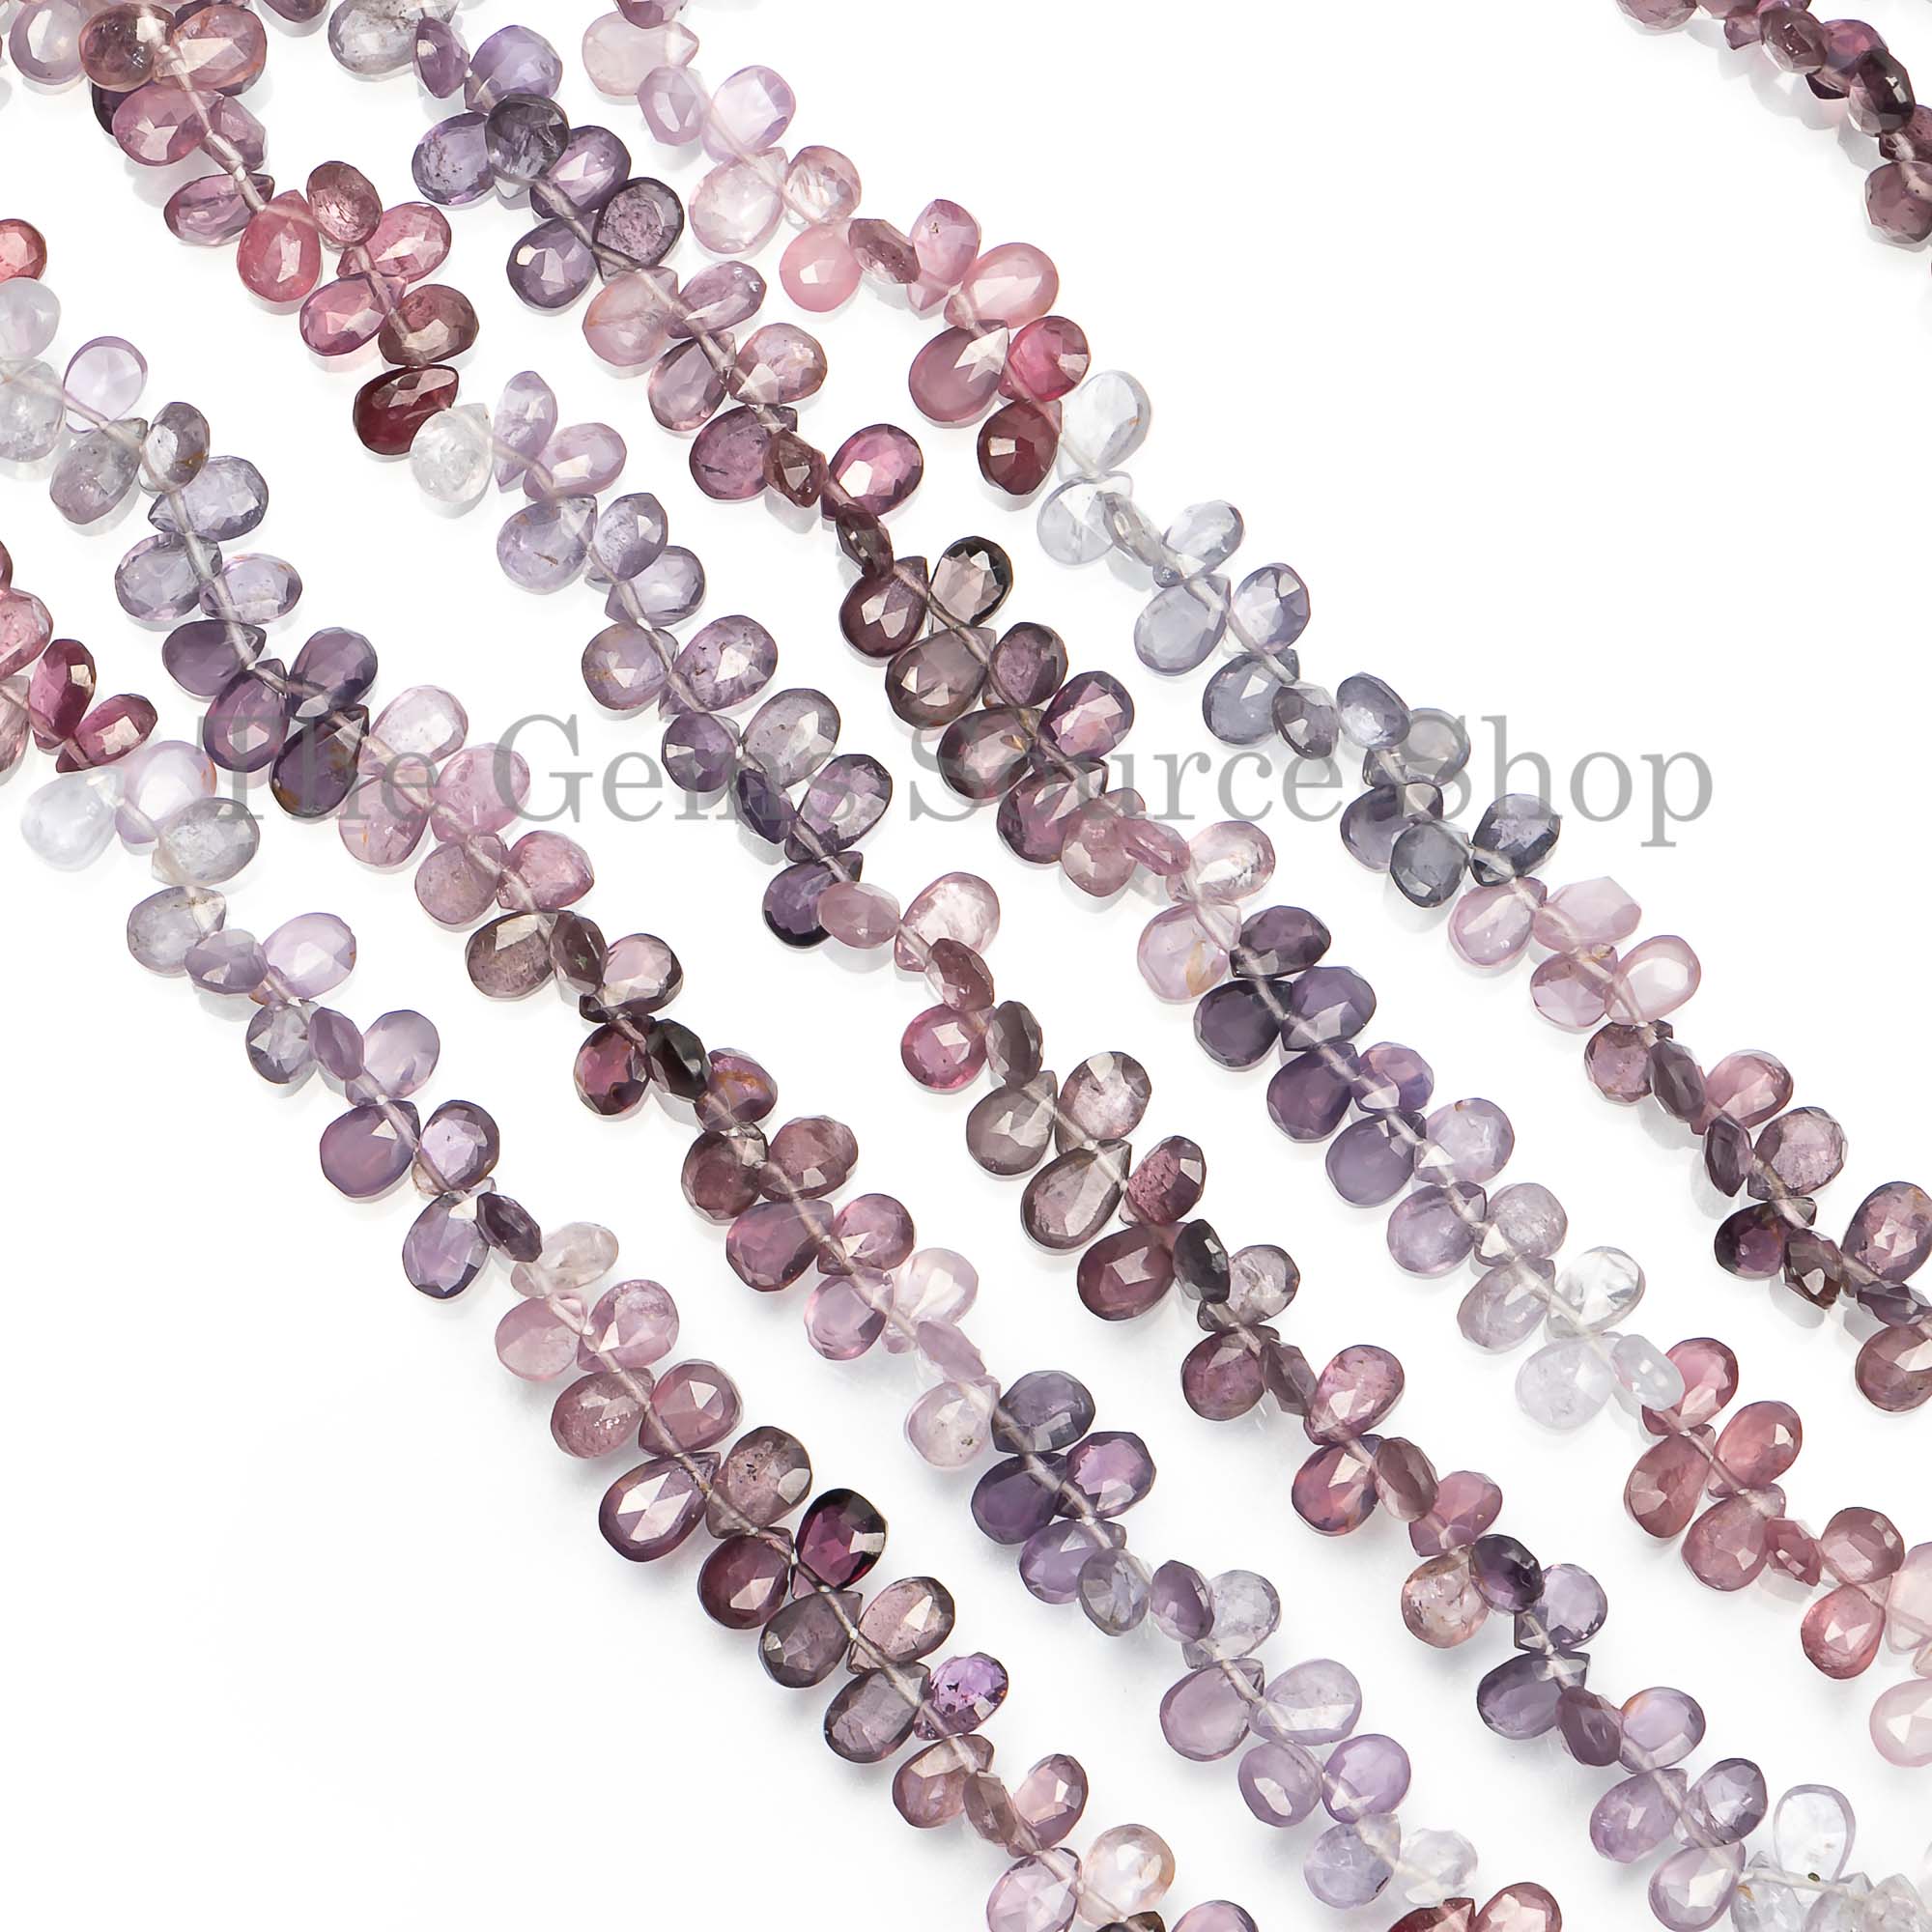 Spinel Faceted Beads, Lavender Spinel Beads, Faceted Beads, Pear Briolette